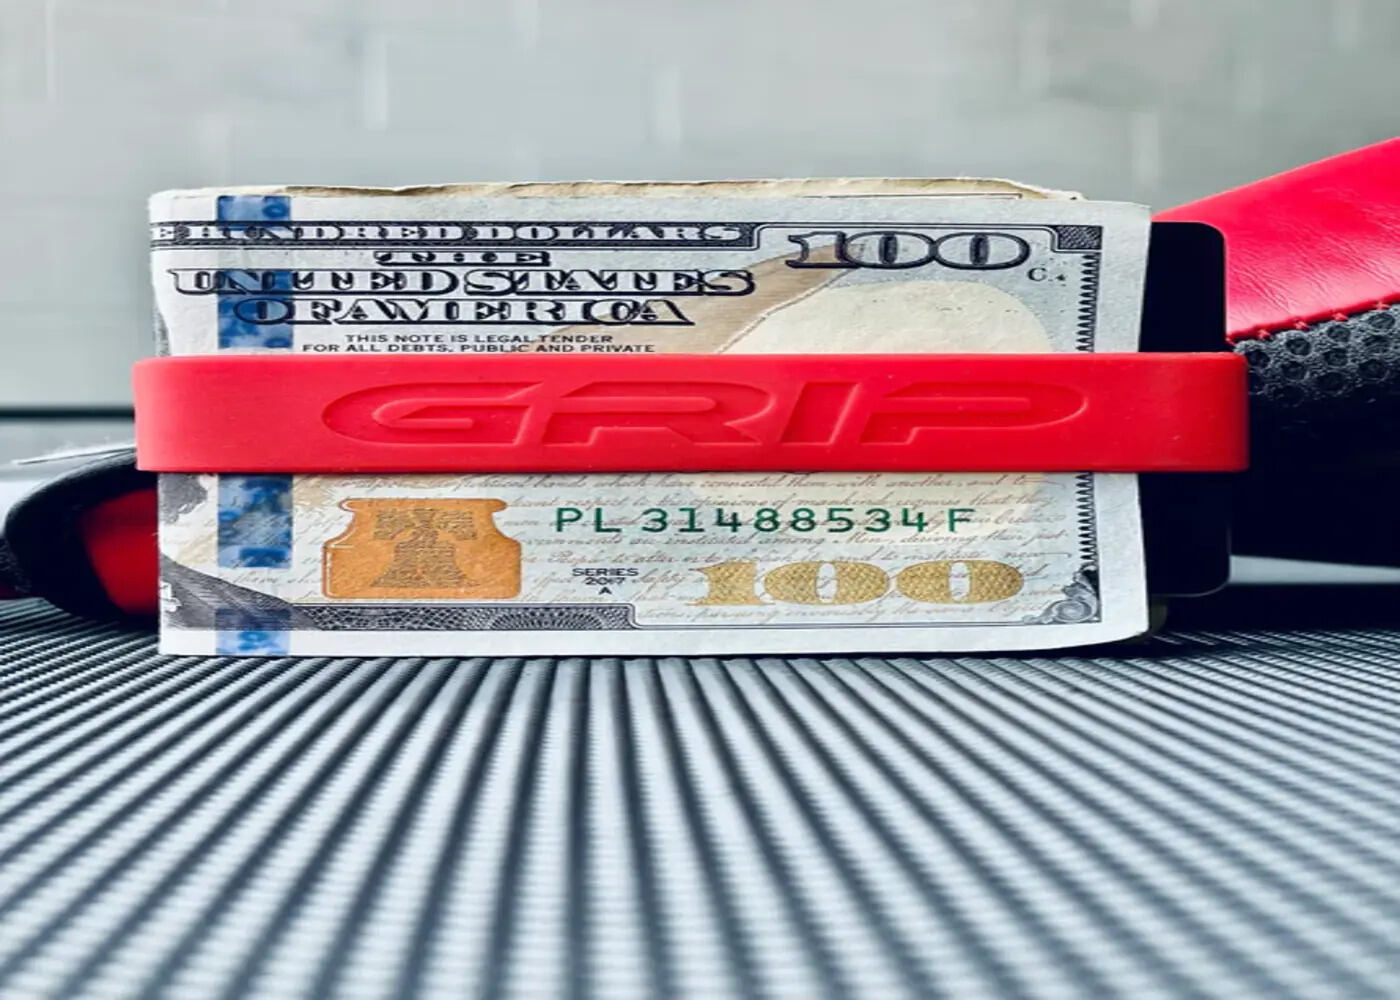 Money Bands For cash: 12 Surprising Benefits of Using Money Bands